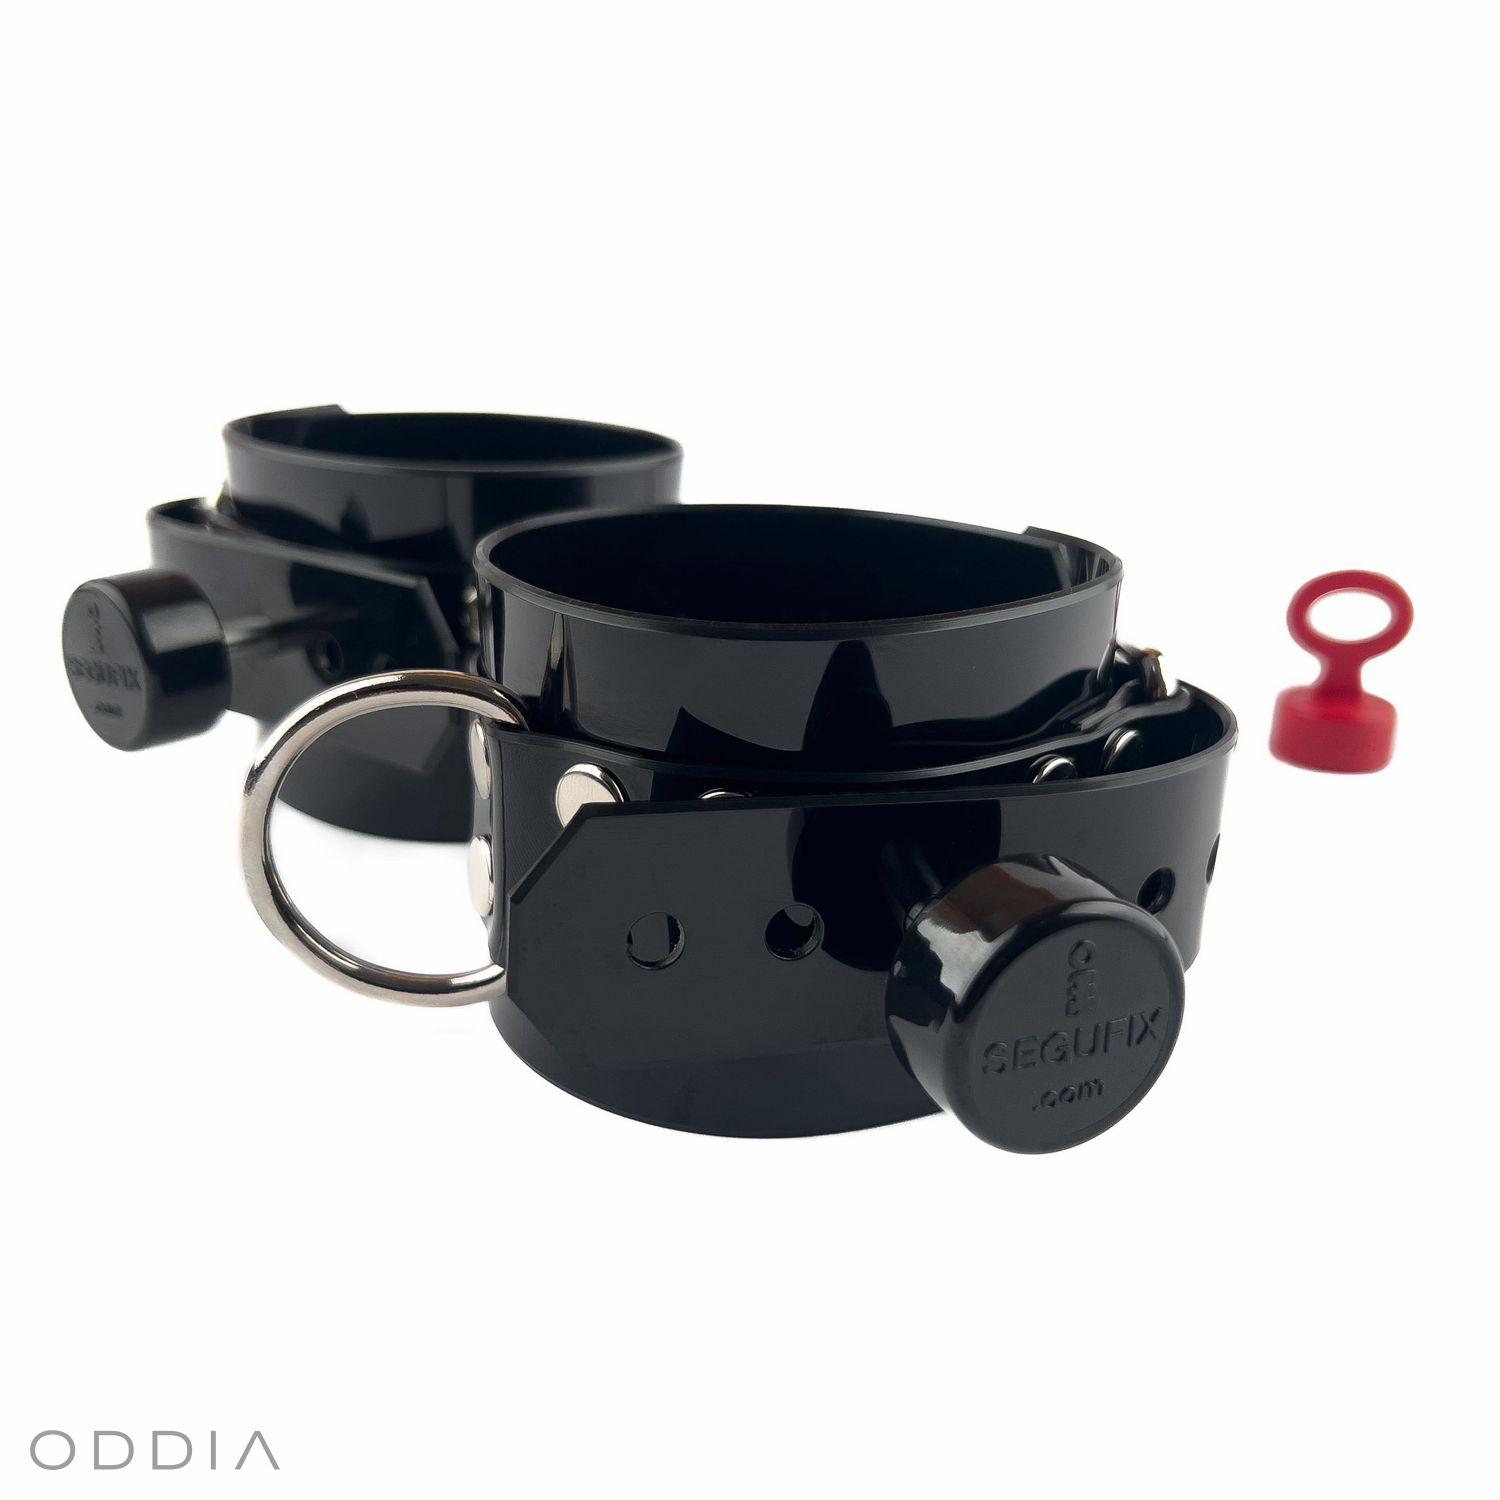 Black locking BDSM restraints with Segufix magnetic locks and high-quality silver-colored metalwork.